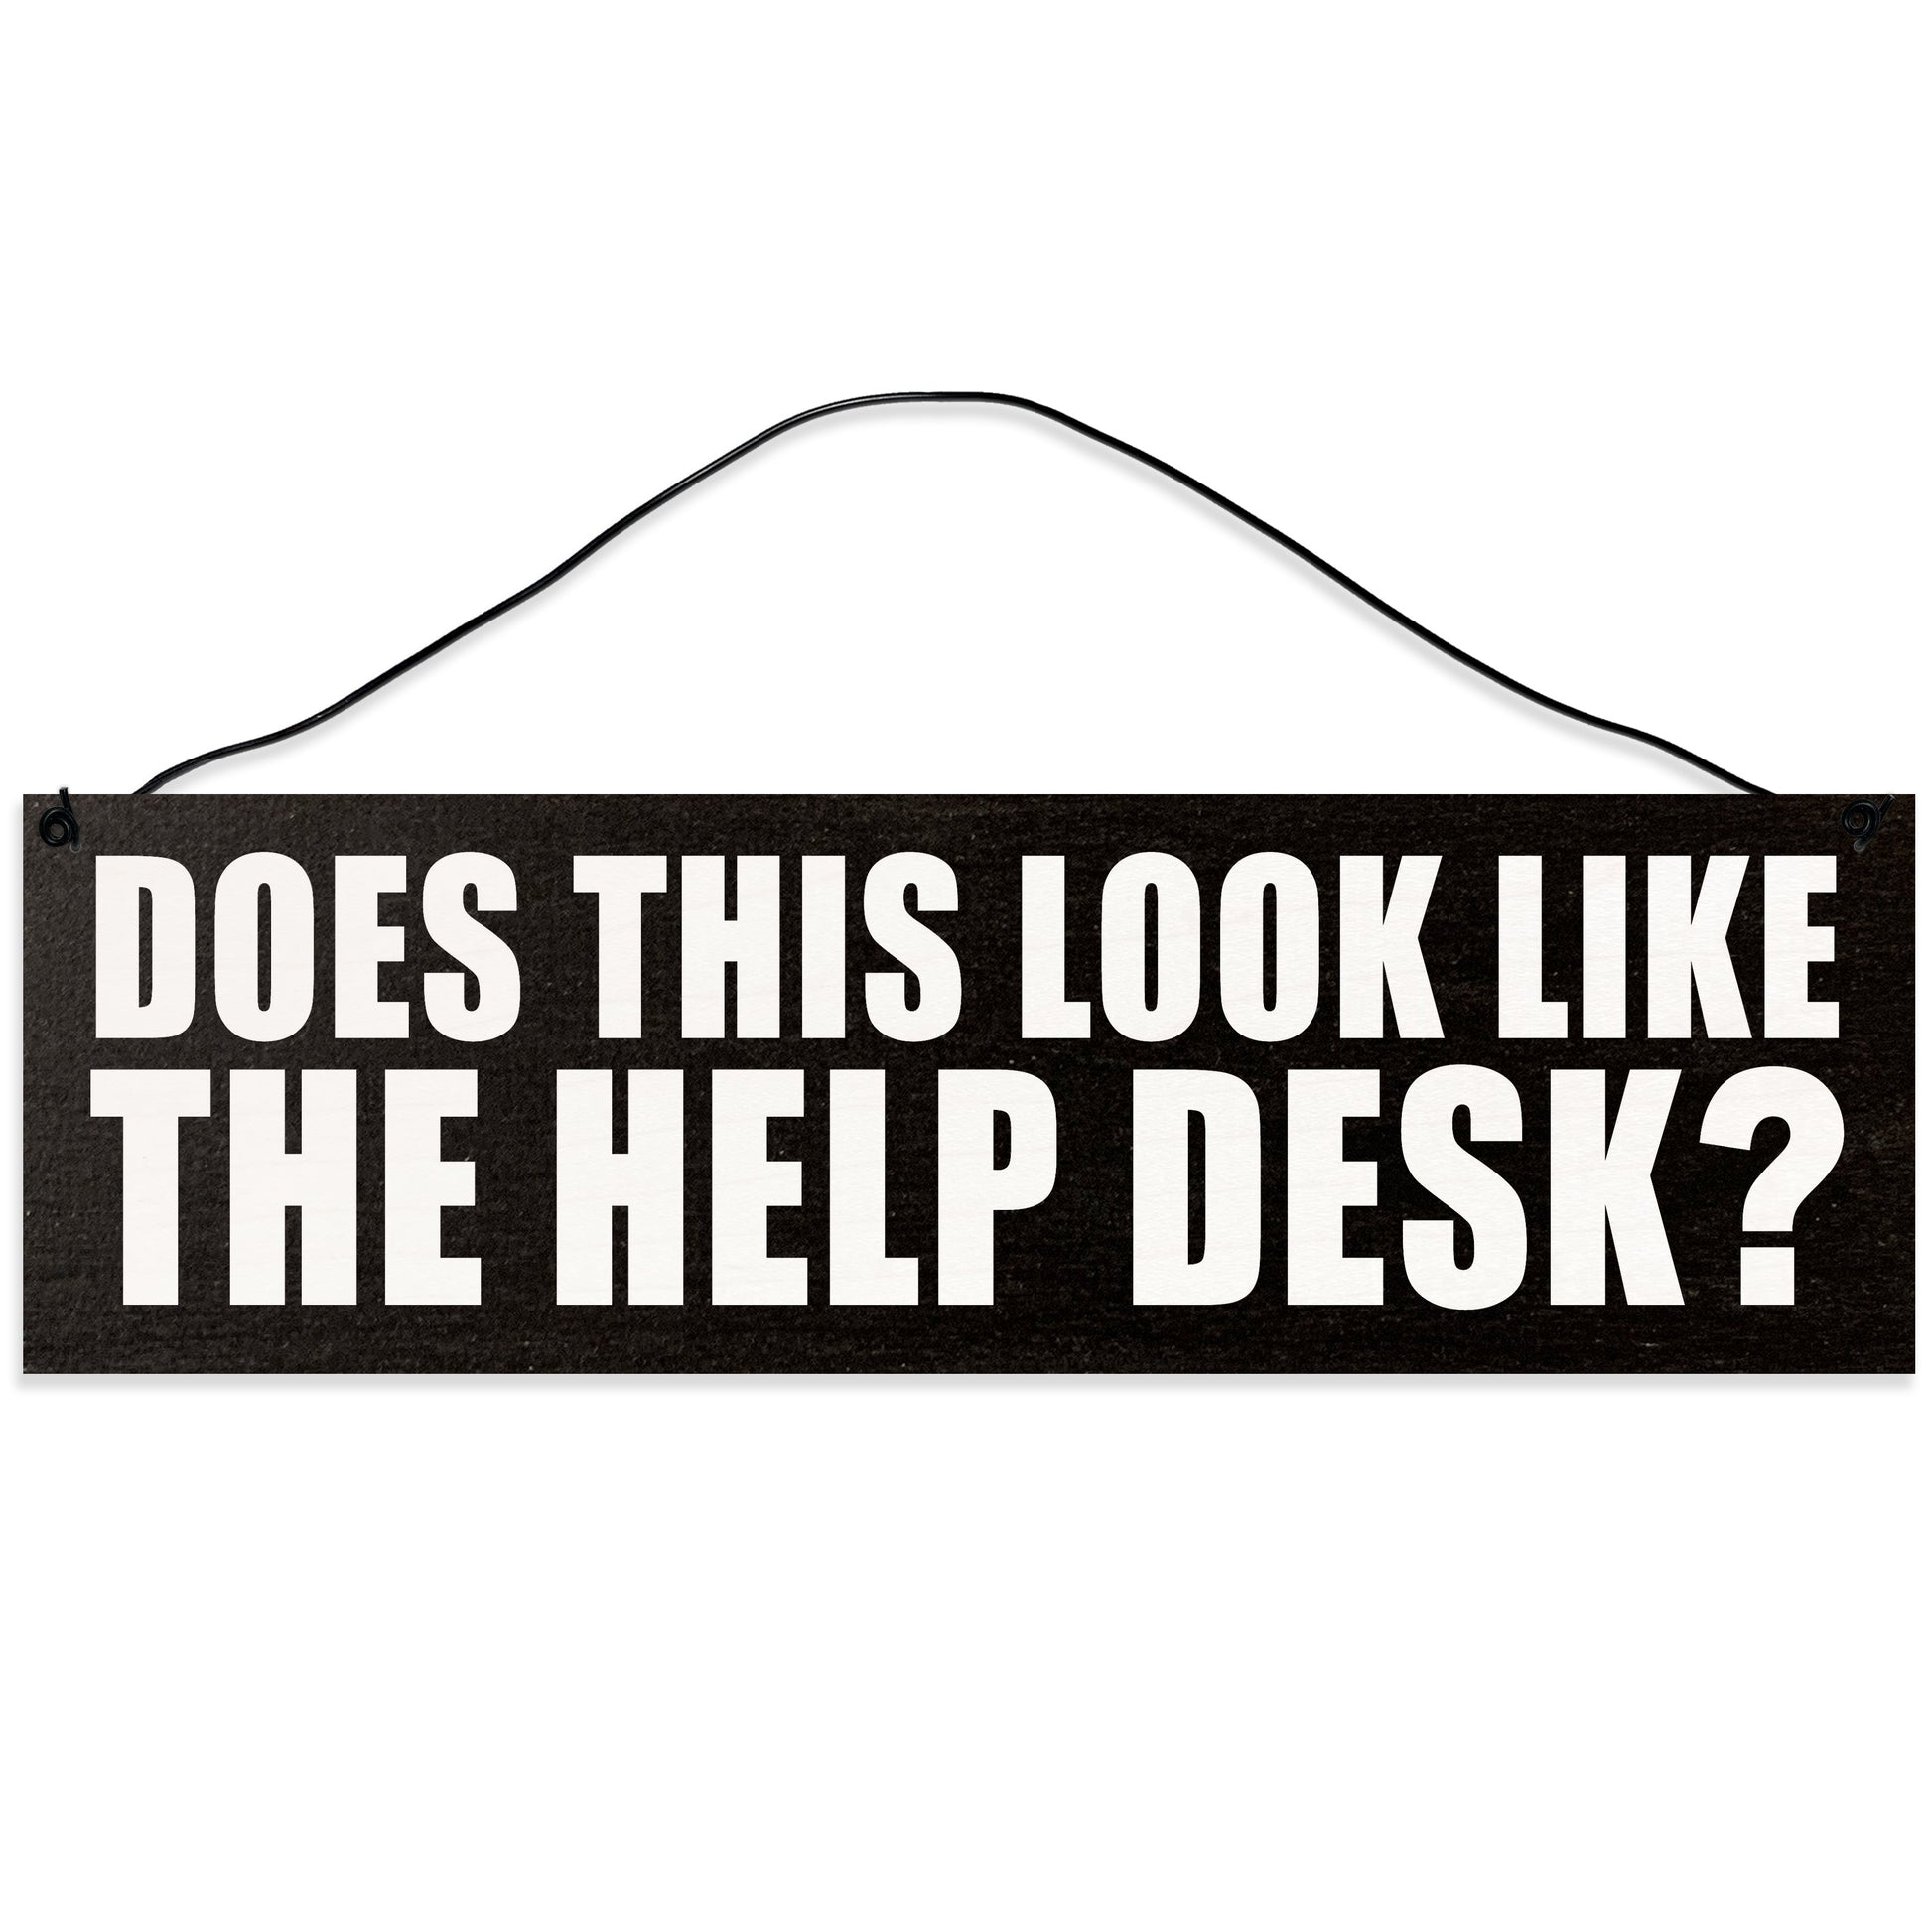 Sawyer's Mill - Does This Look Like The Help Desk? Wood Sign for Home or Office. Measures 3x10 inches.